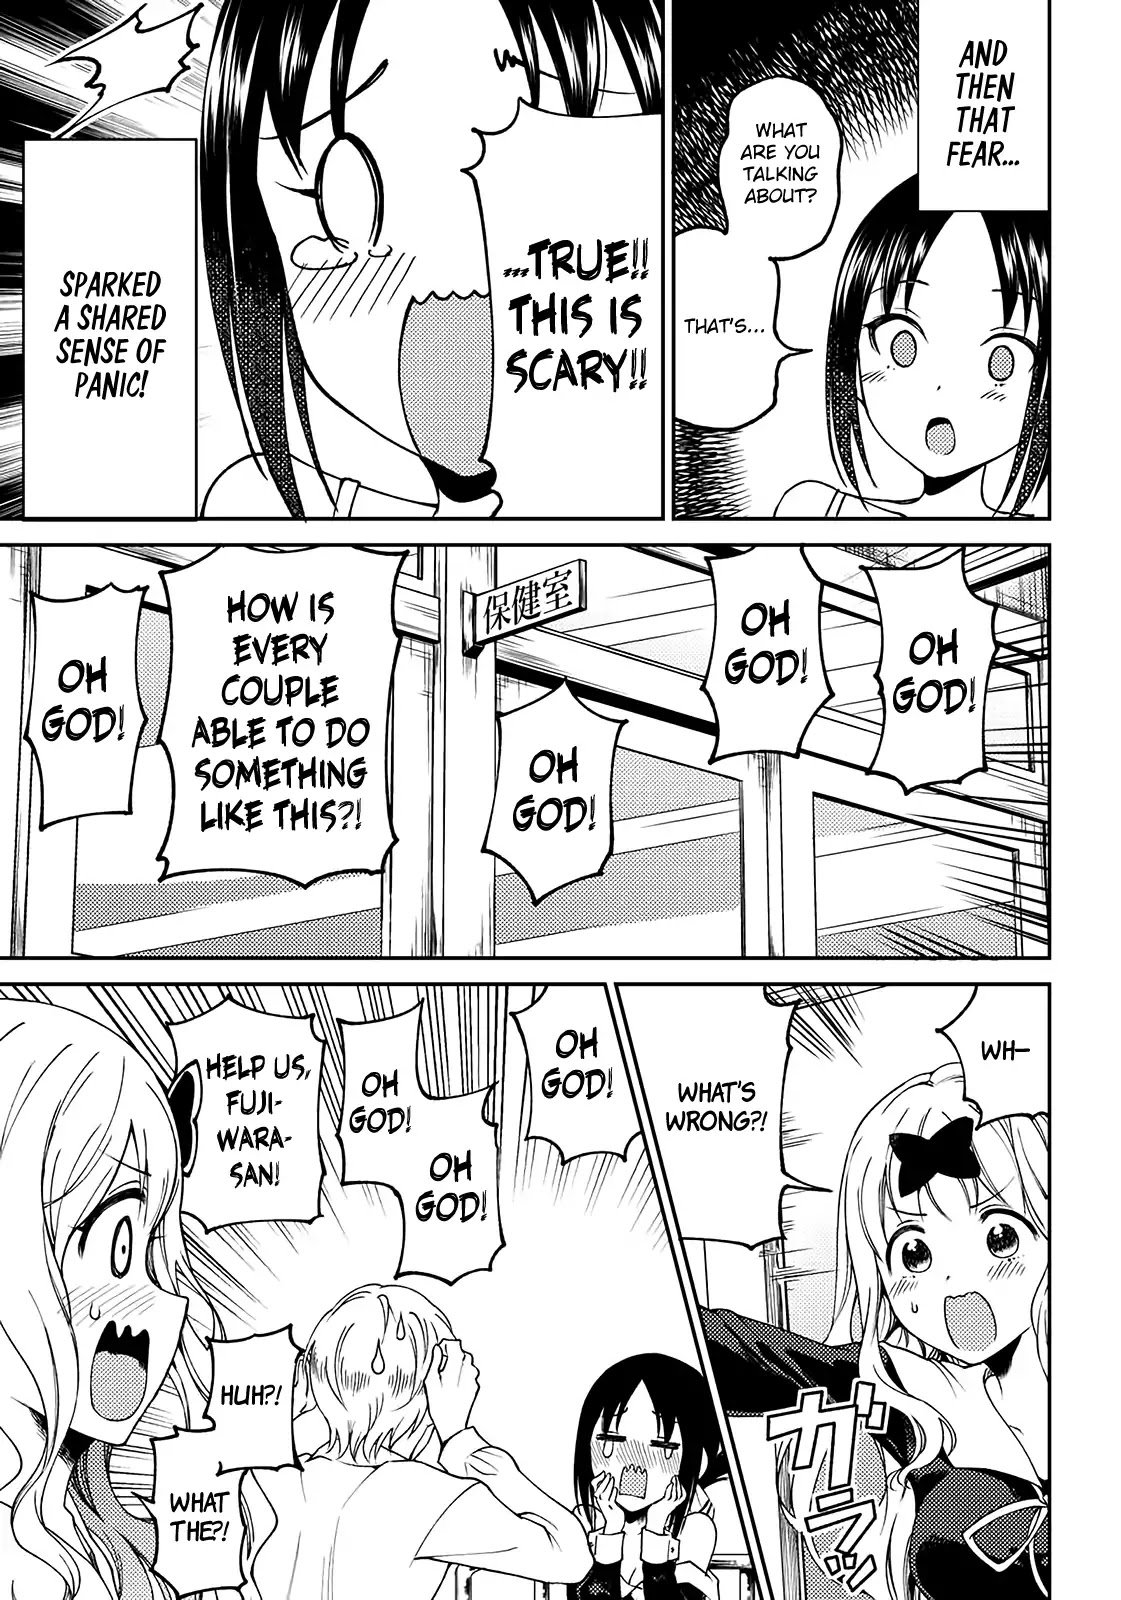 kaguya-wants-to-be-confessed-to-official-doujin-chap-3-20